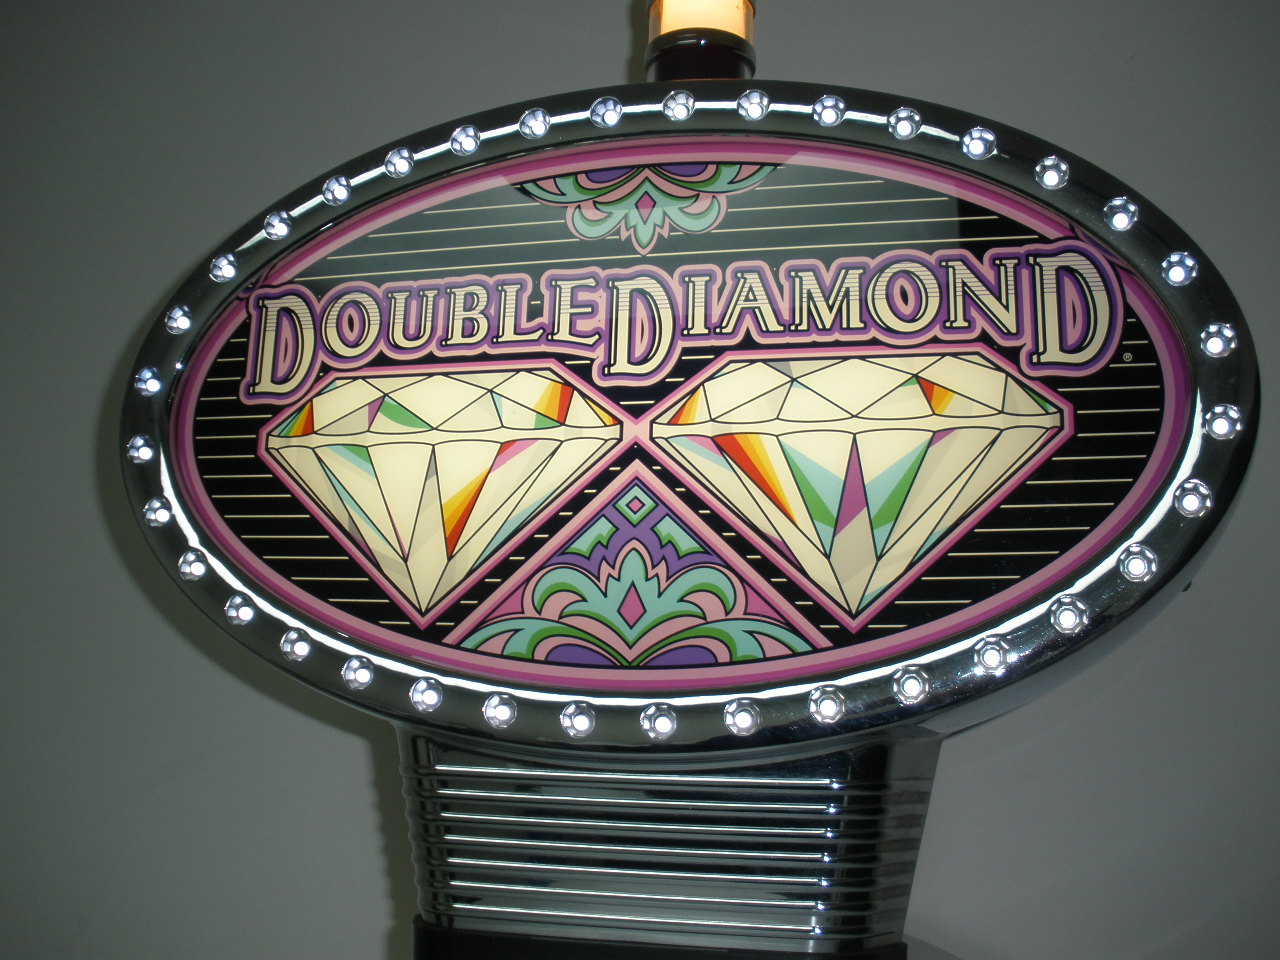 IGT DOUBLE DIAMOND S2000 QUARTER COIN HANDLING WITH LIGHTED TOPPER (ROUND  TOP) For Sale • Gambler's Oasis USA